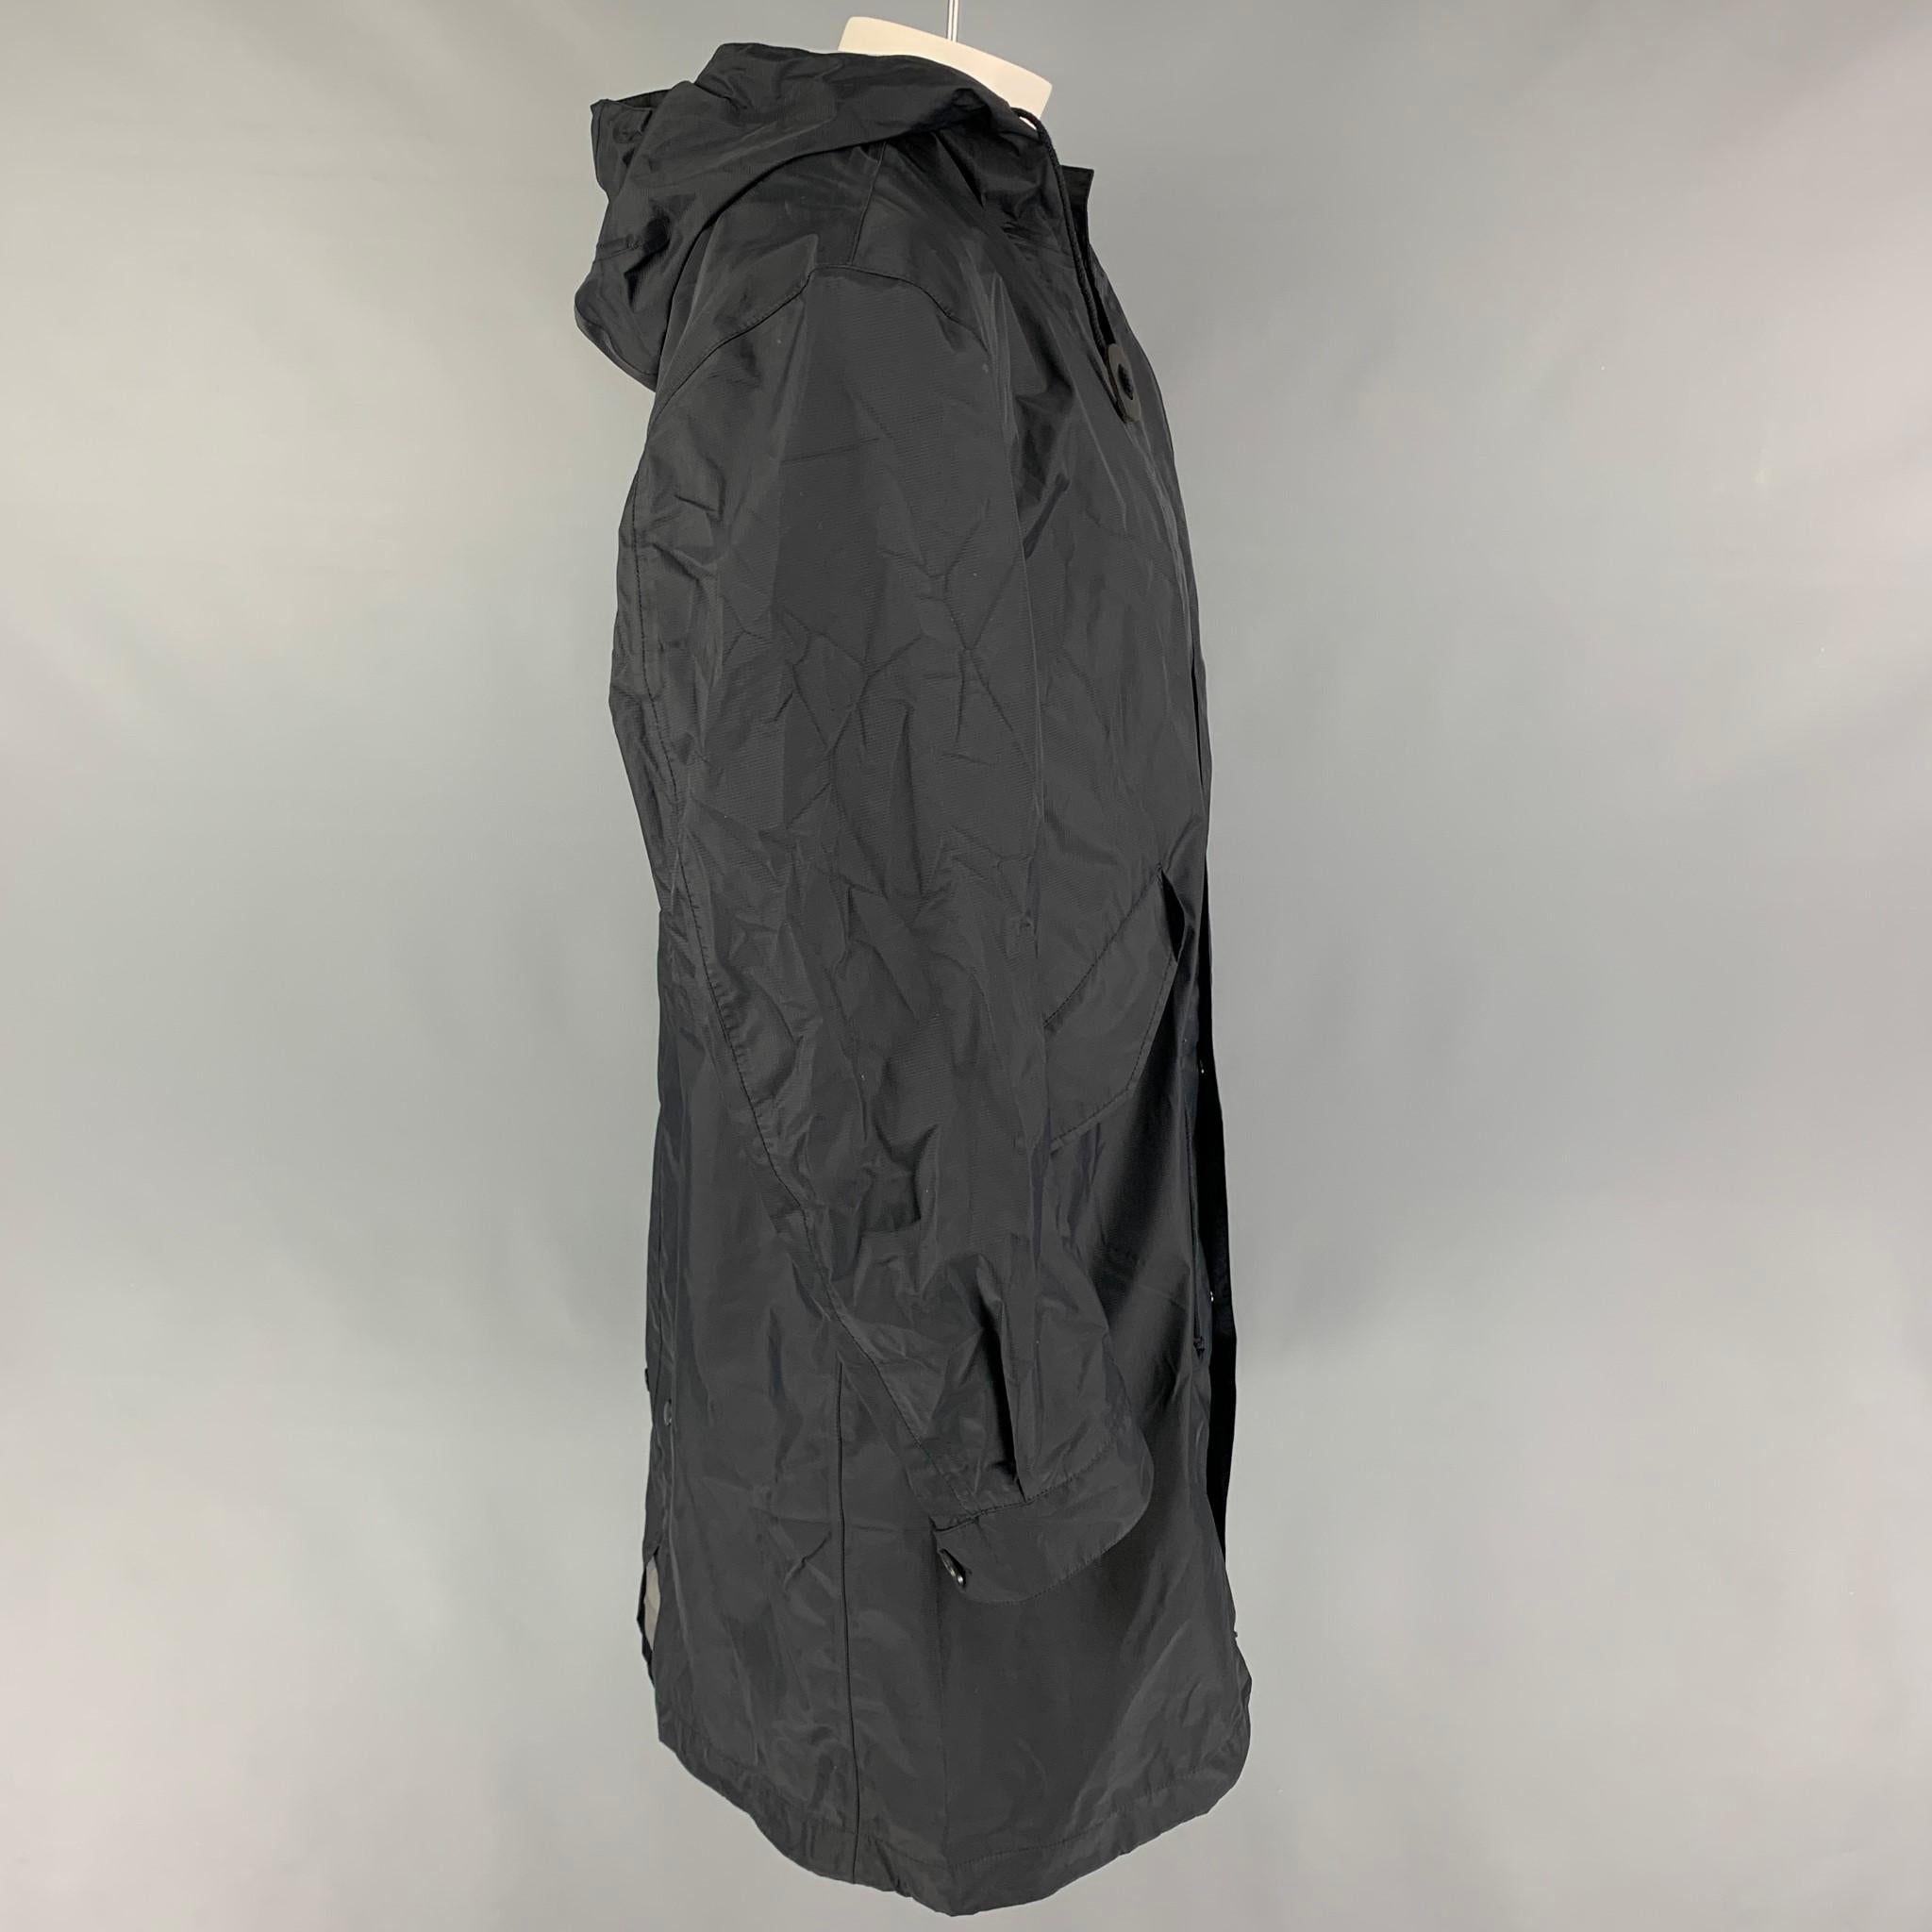 JUNYA WATANABE eYe coat comes in a black nylon with GORE-TEX technology featuring a hooded style, flap pockets, leather trim, and a hidden zip & snap button closure. 

Very Good Pre-Owned Condition.
Marked: M / AD2016

Measurements:

Shoulder: 21